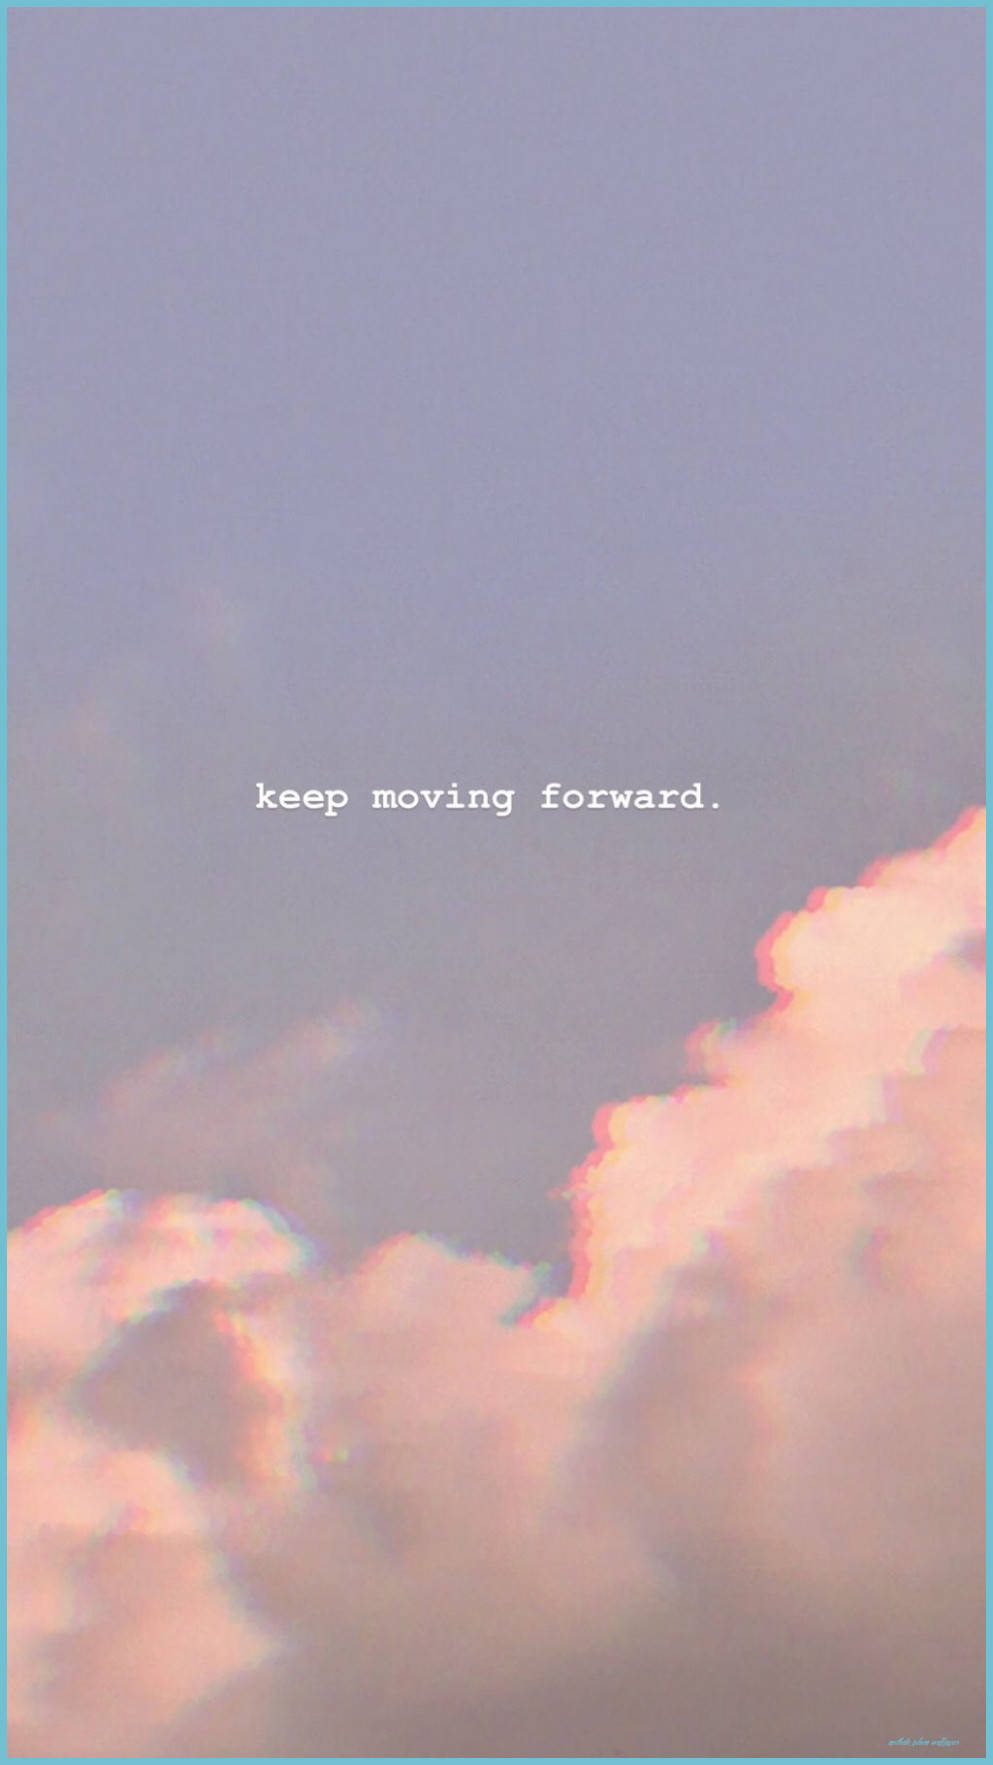 Pretty Aesthetic Text In The Clouds Background